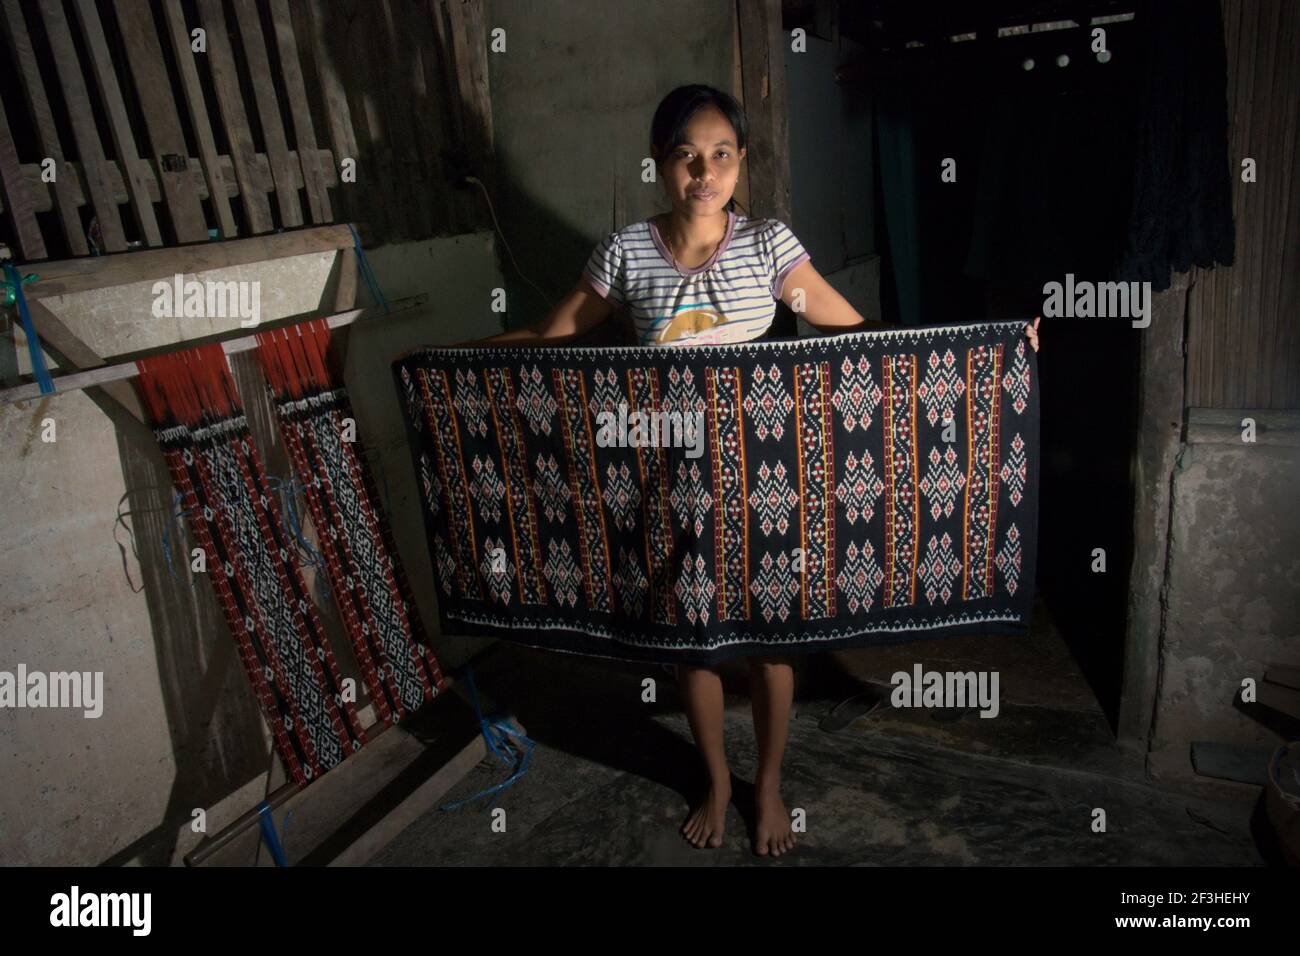 Koten showing a Rote Island's traditional woven fabric that her family has created in Ndao village, Rote Island, Rote Ndao regency, East Nusa Tenggara province, Indonesia. Each month, the family produces three fabrics, which priced between 300,000-500,000 IDR. Stock Photo